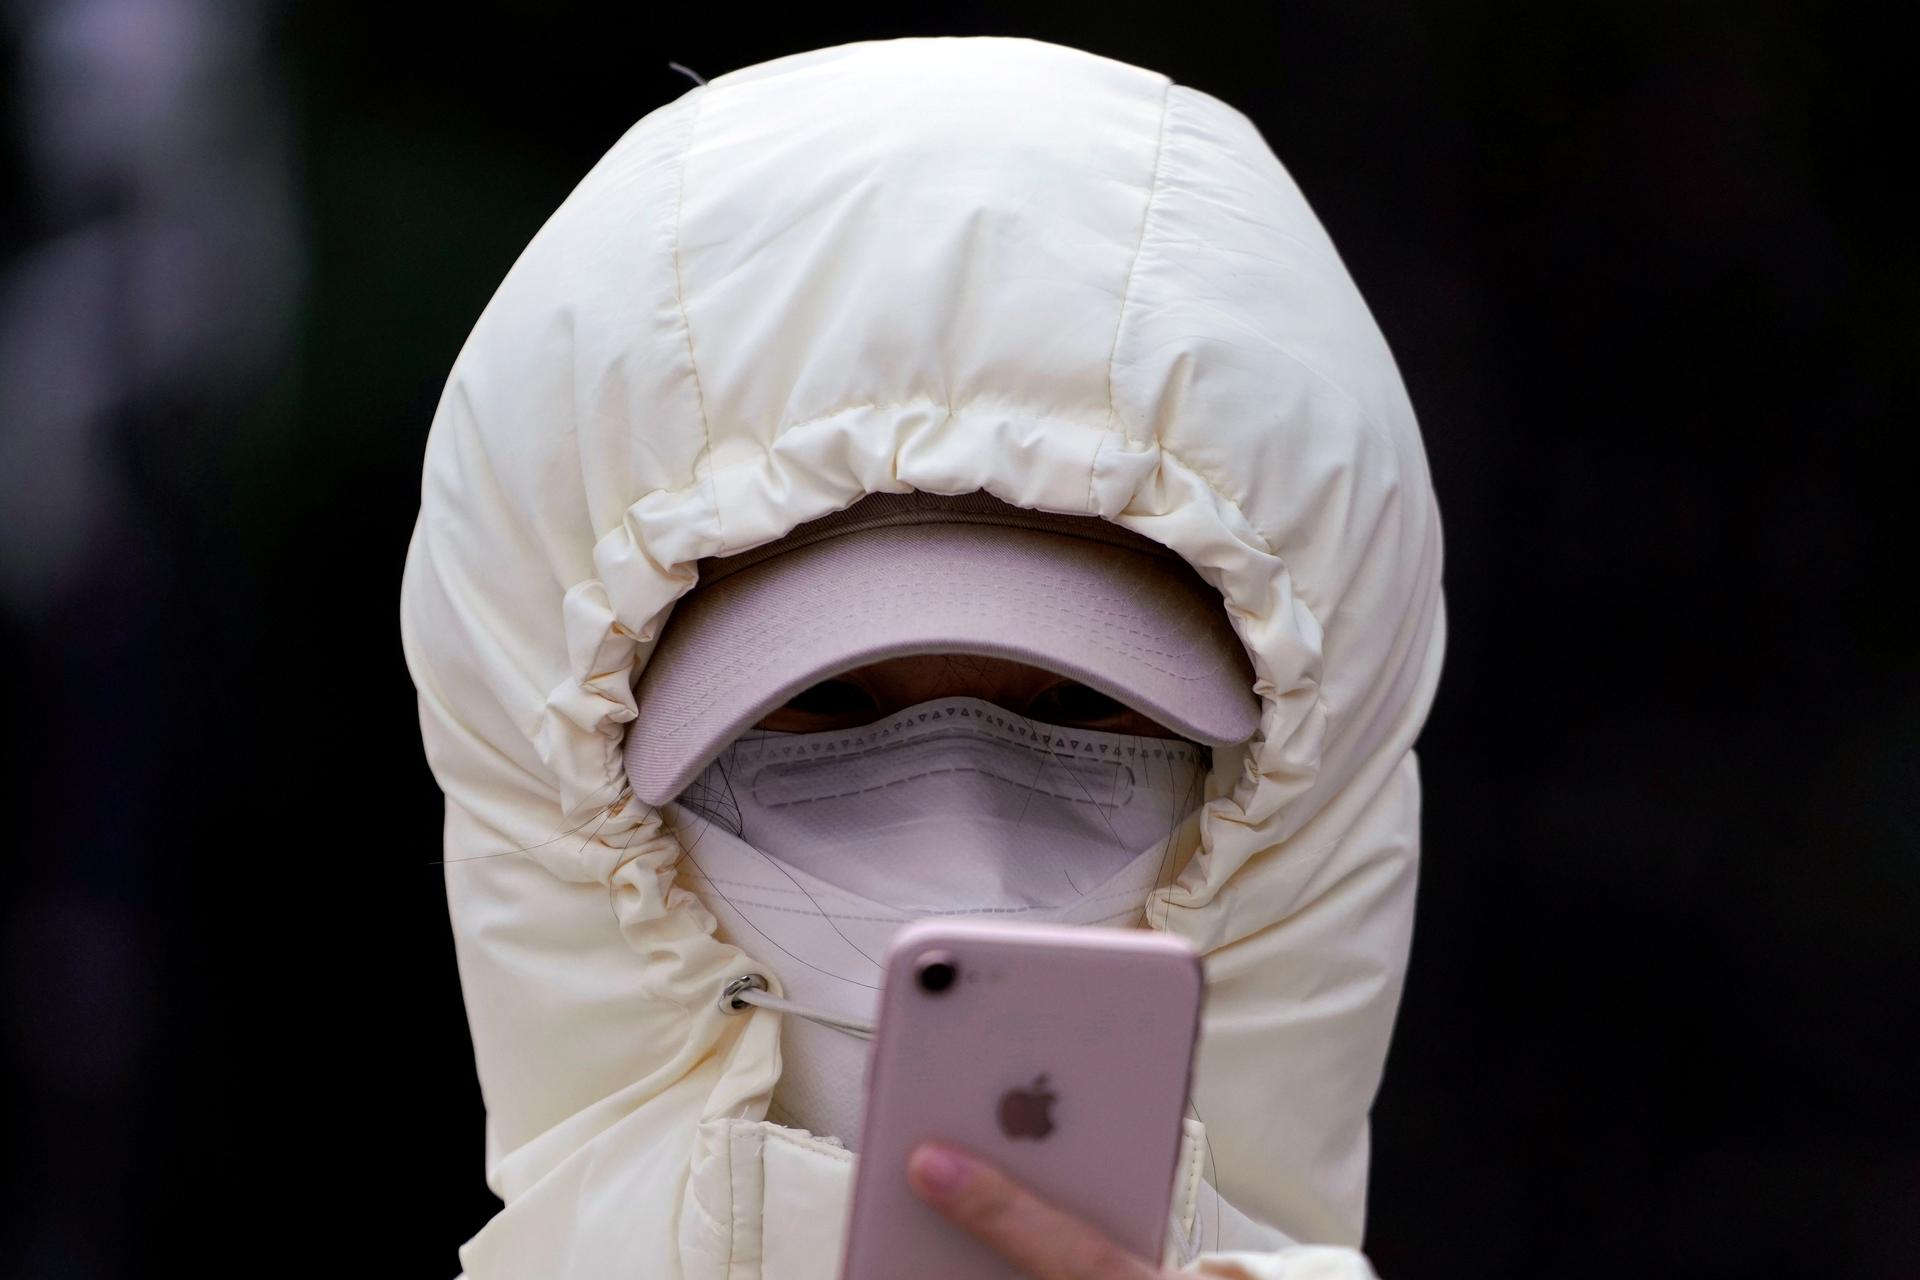 A woman wearing a mask checks her mobile phone in Shanghai, Jan. 29, 2020.